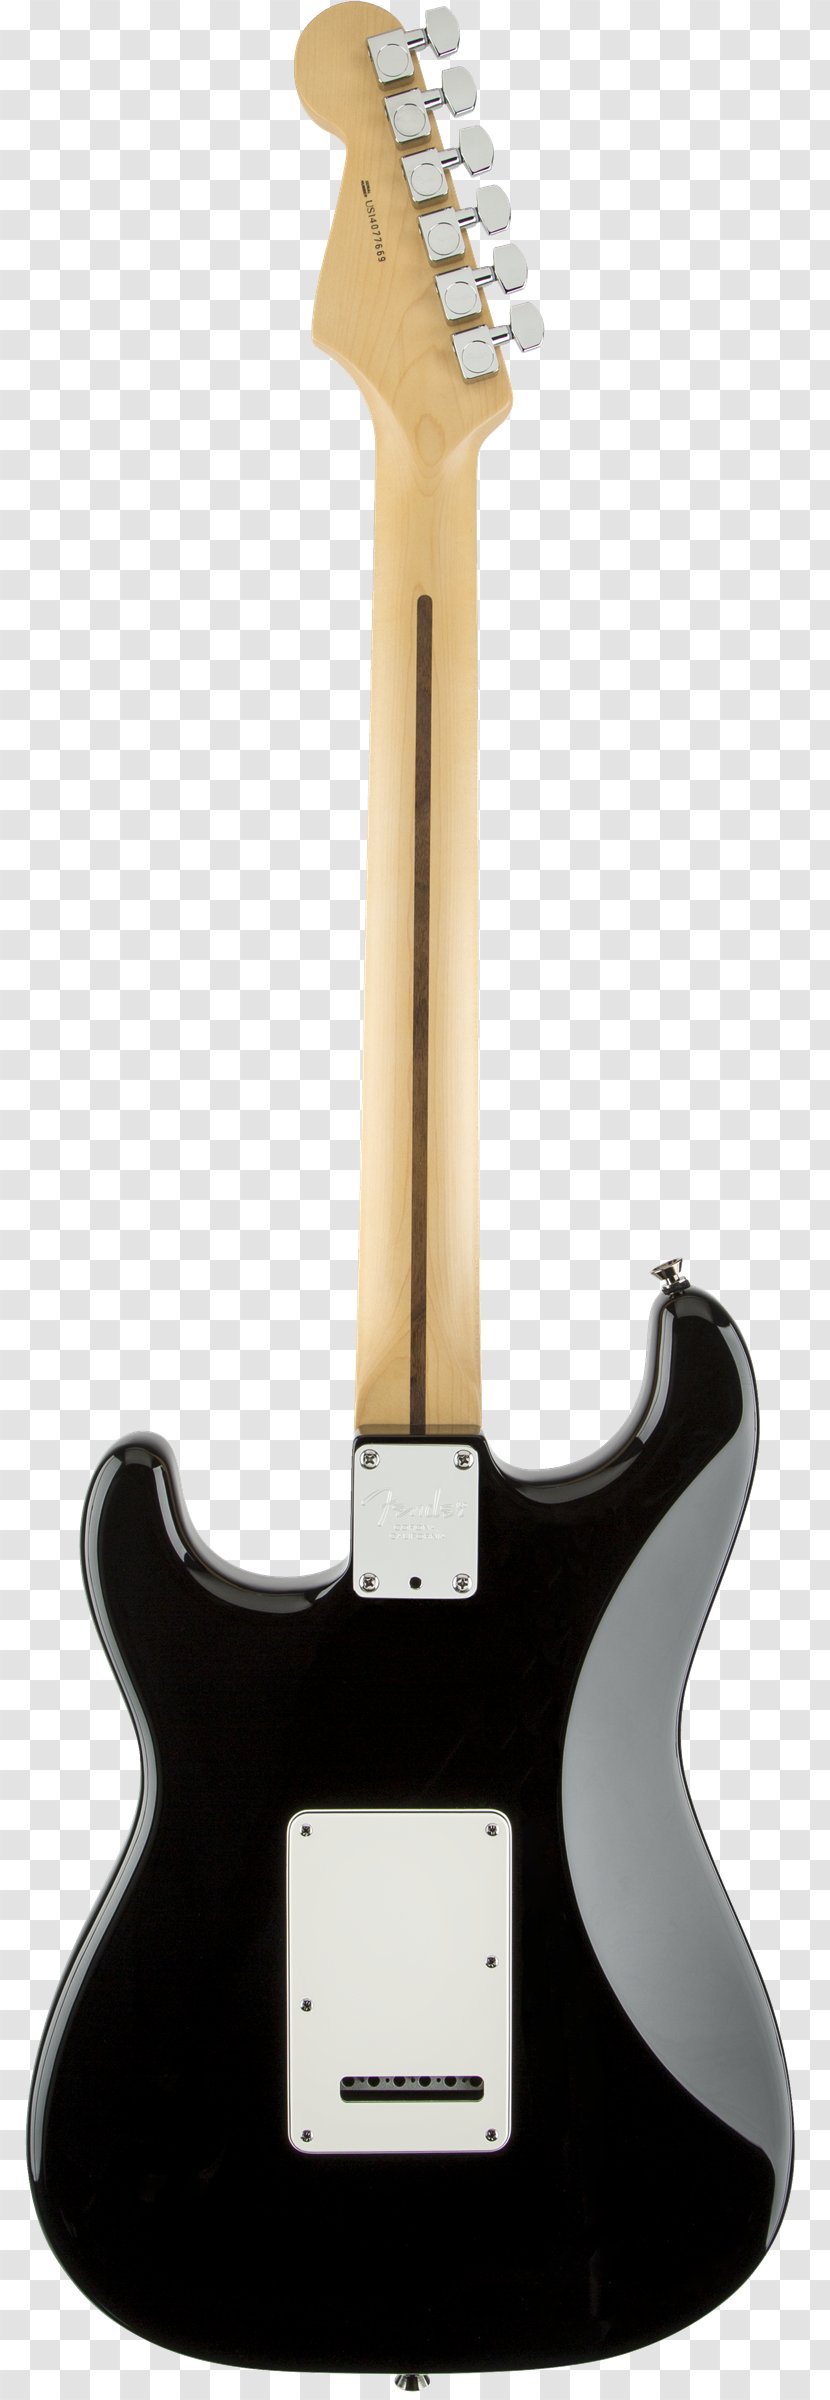 Fender Stratocaster Electric Guitar Musical Instruments Corporation Squier Deluxe Hot Rails - String Instrument Transparent PNG